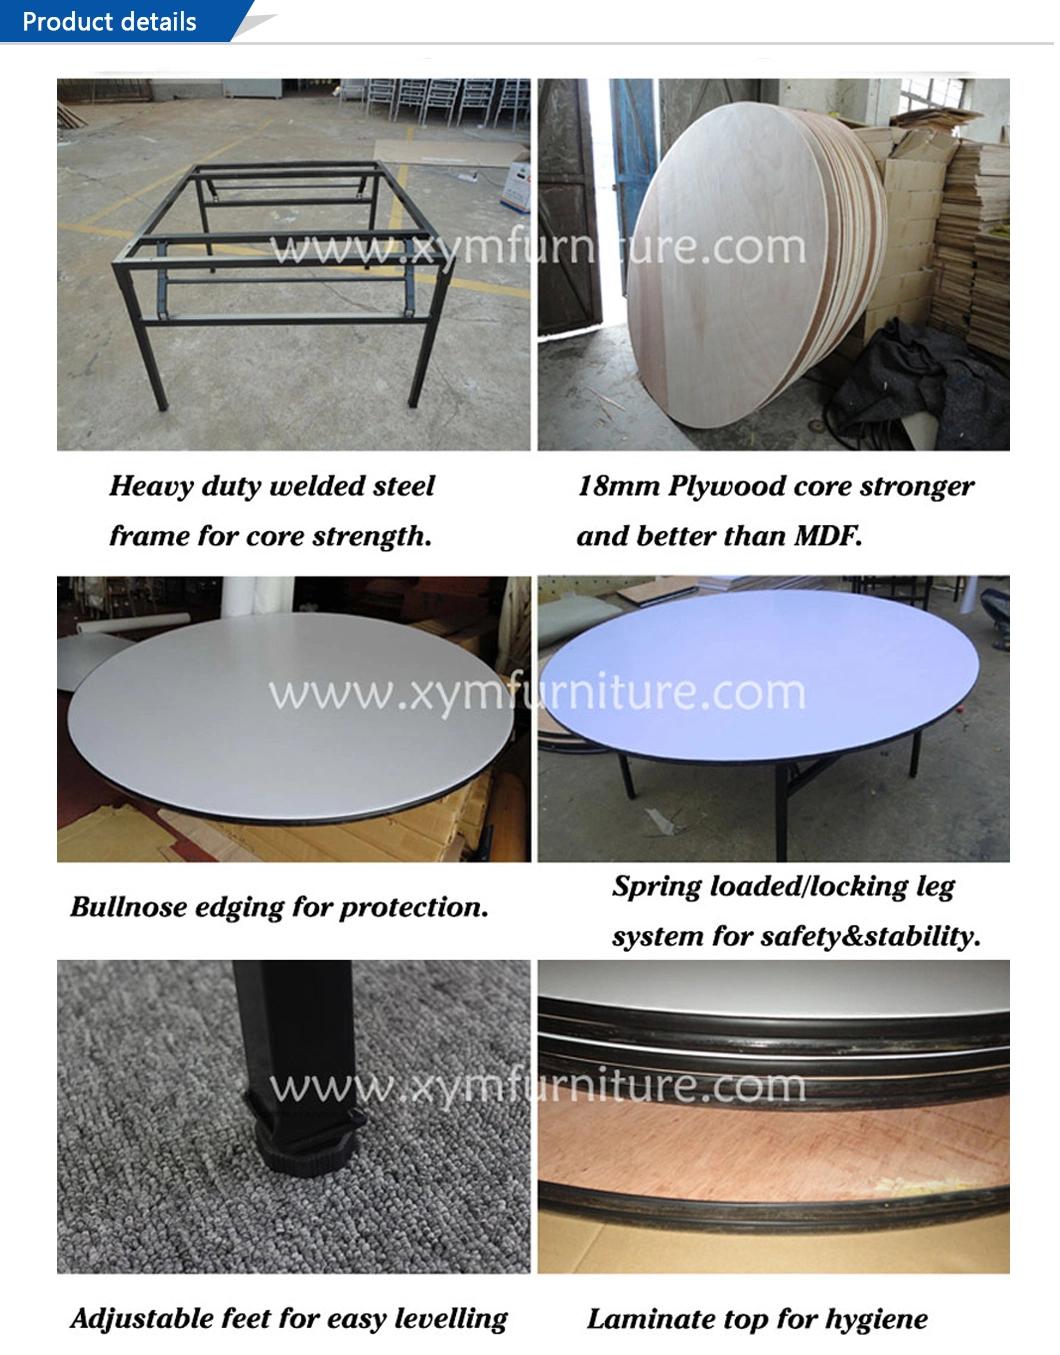 Cheap Price and High Quality Melamine Folding Conference Table (XYM-T11)